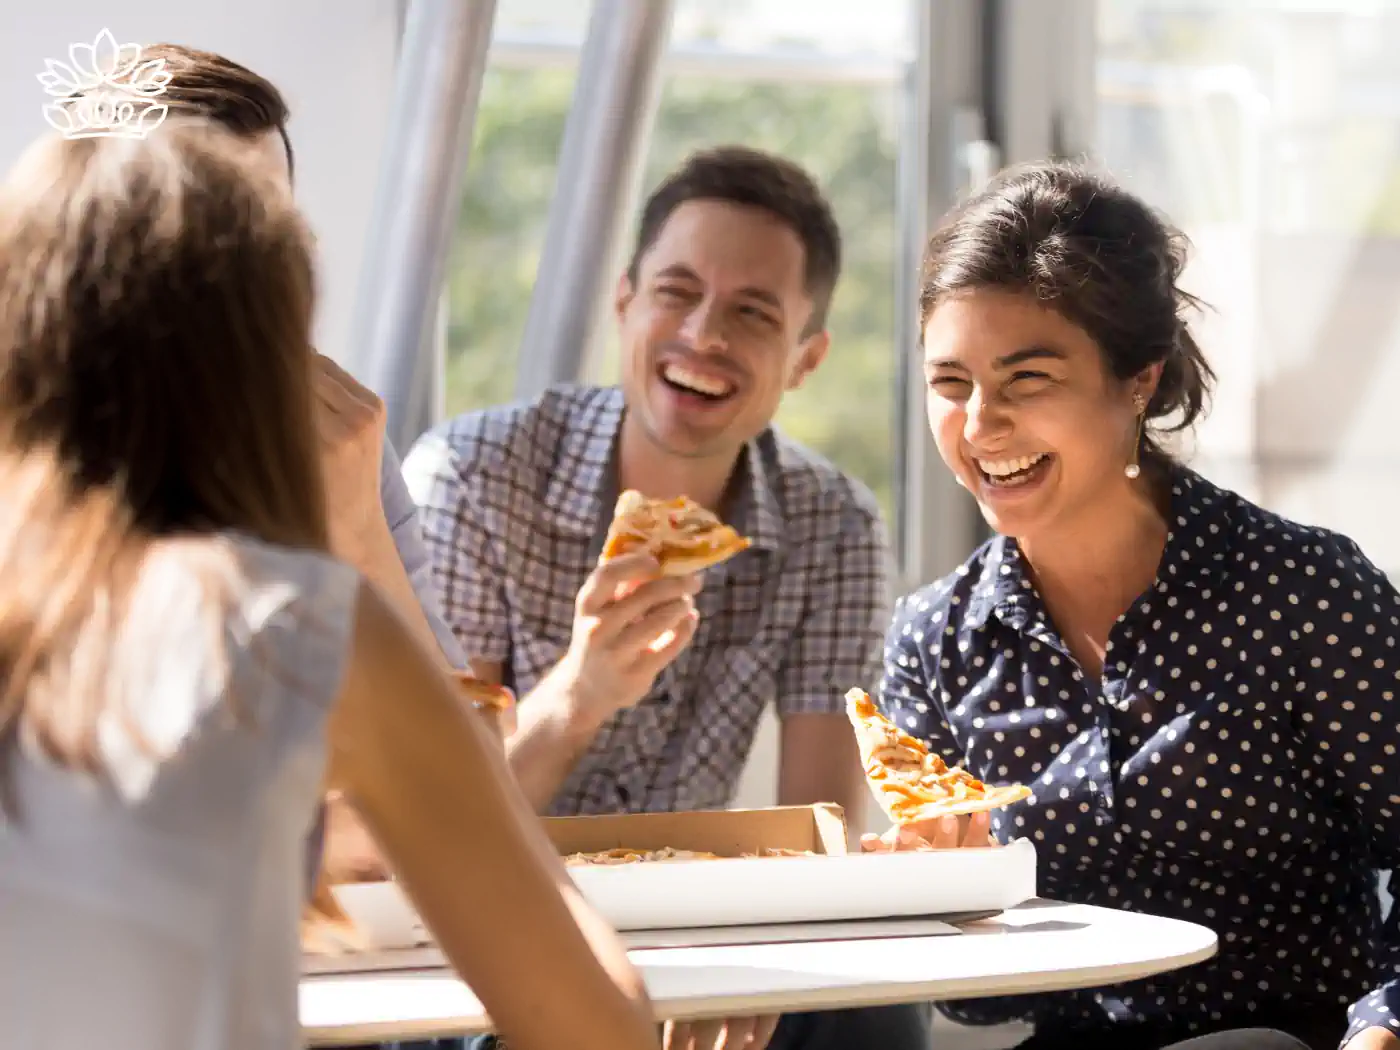 Three joyful colleagues enjoying a pizza lunch together in a sunlit office, laughing and sharing a pleasant moment. The ambiance reflects the warmth and camaraderie of a team celebration. Gift boxes for colleagues, delivered with heart by Fabulous Flowers and Gifts.